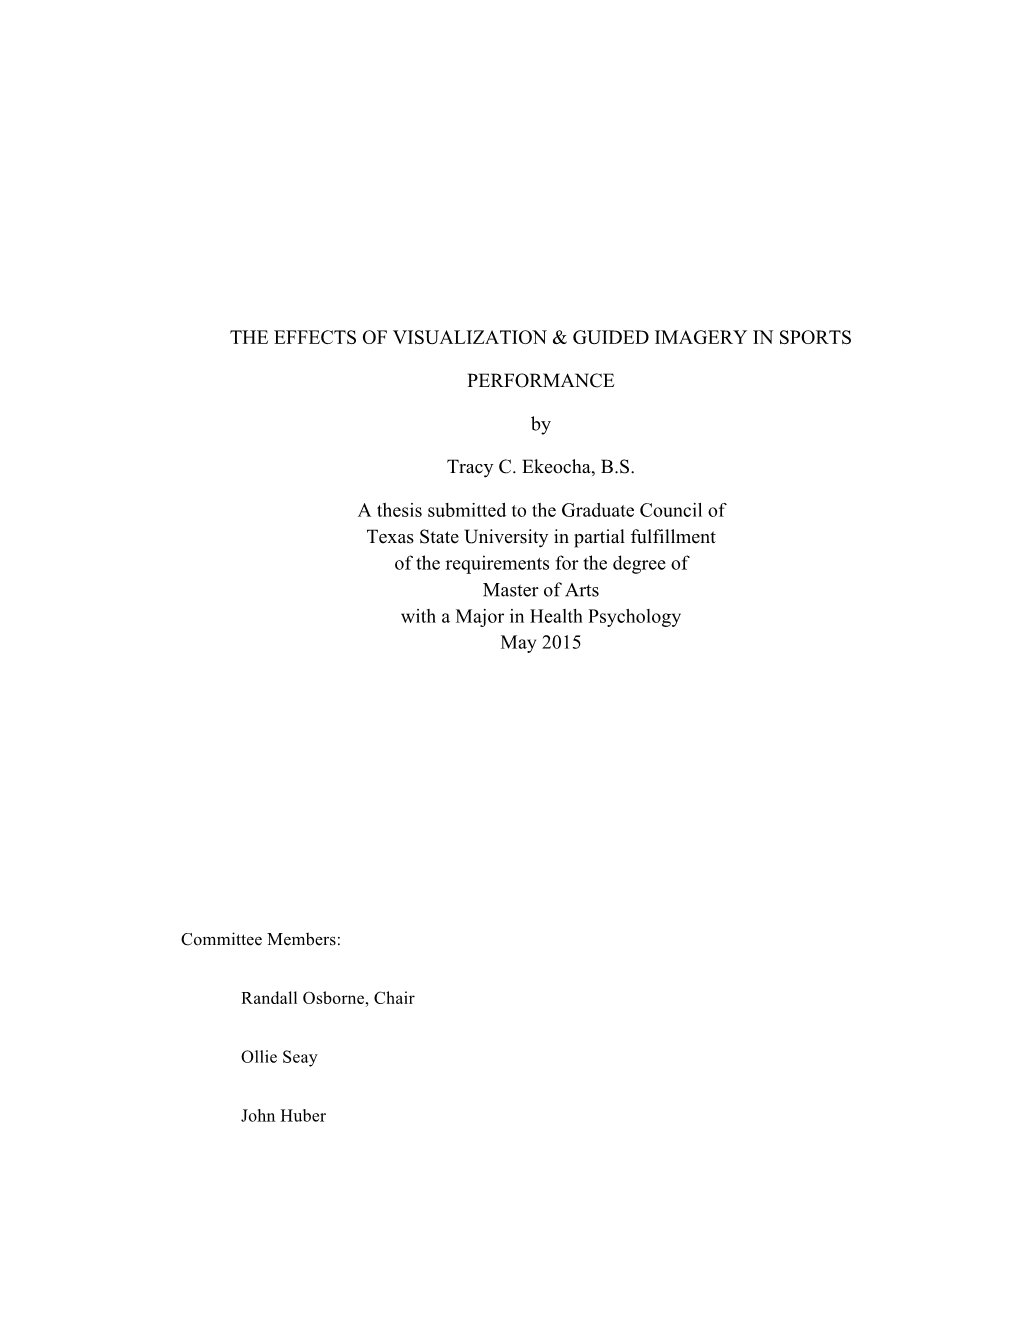 THE EFFECTS of VISUALIZATION & GUIDED IMAGERY in SPORTS PERFORMANCE by Tracy C. Ekeocha, B.S. a Thesis Submitted to the G